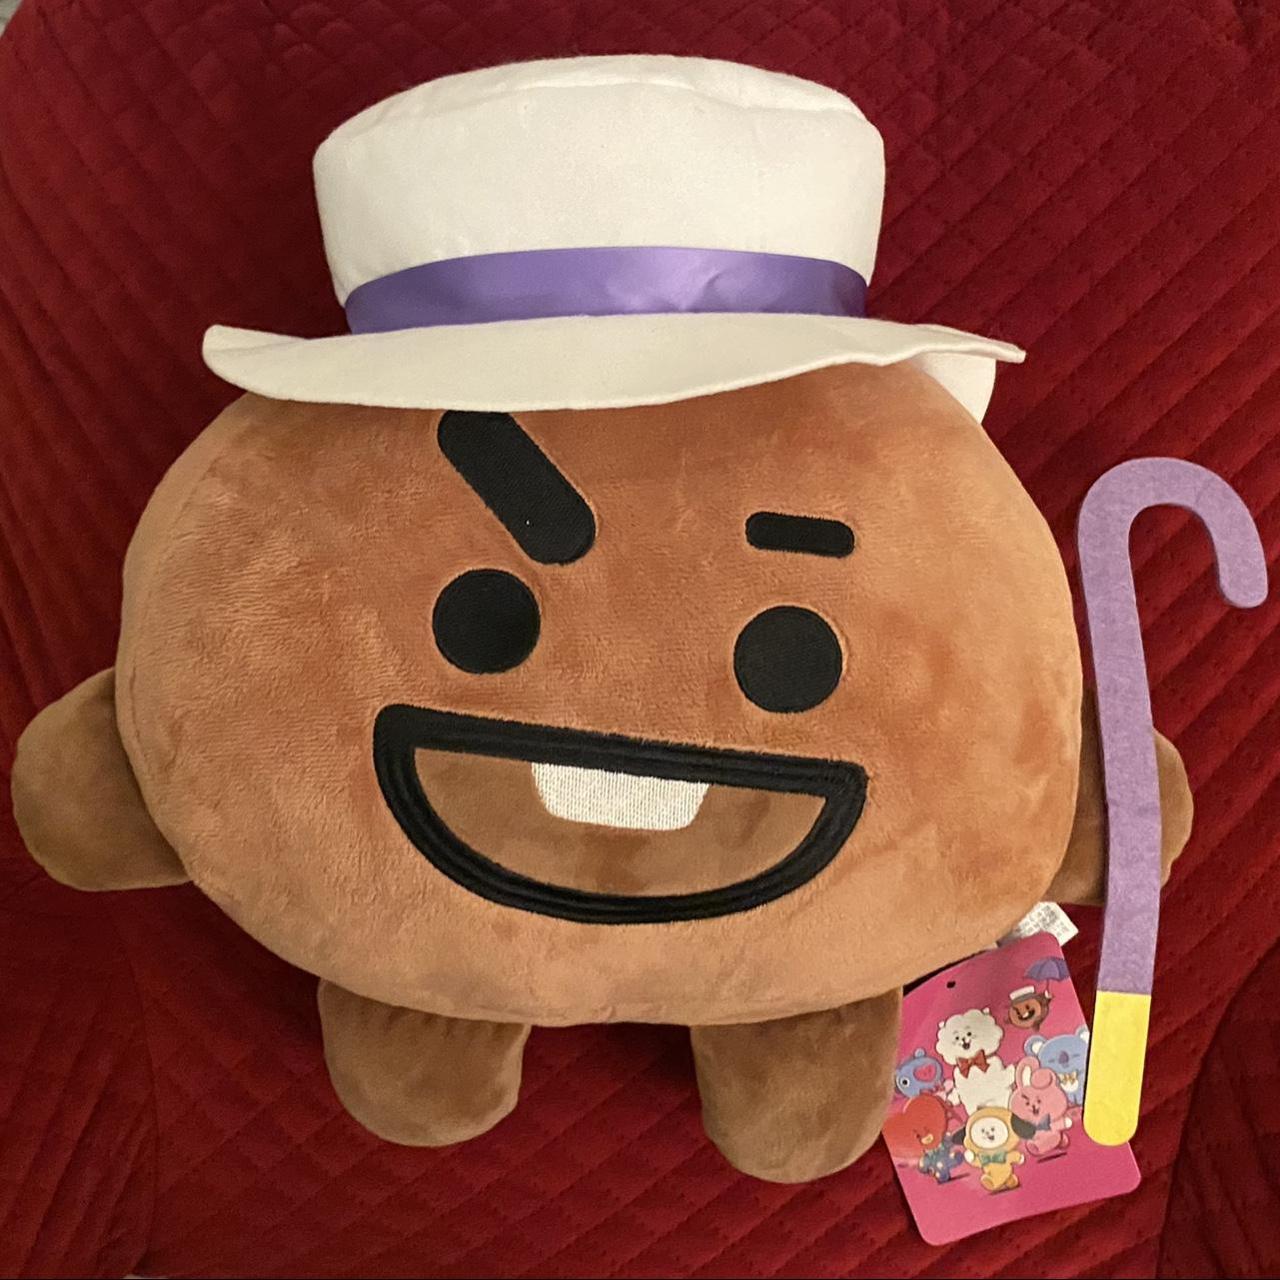 Brand new BT21 Shooky plushies 🍪 With original tags - Depop